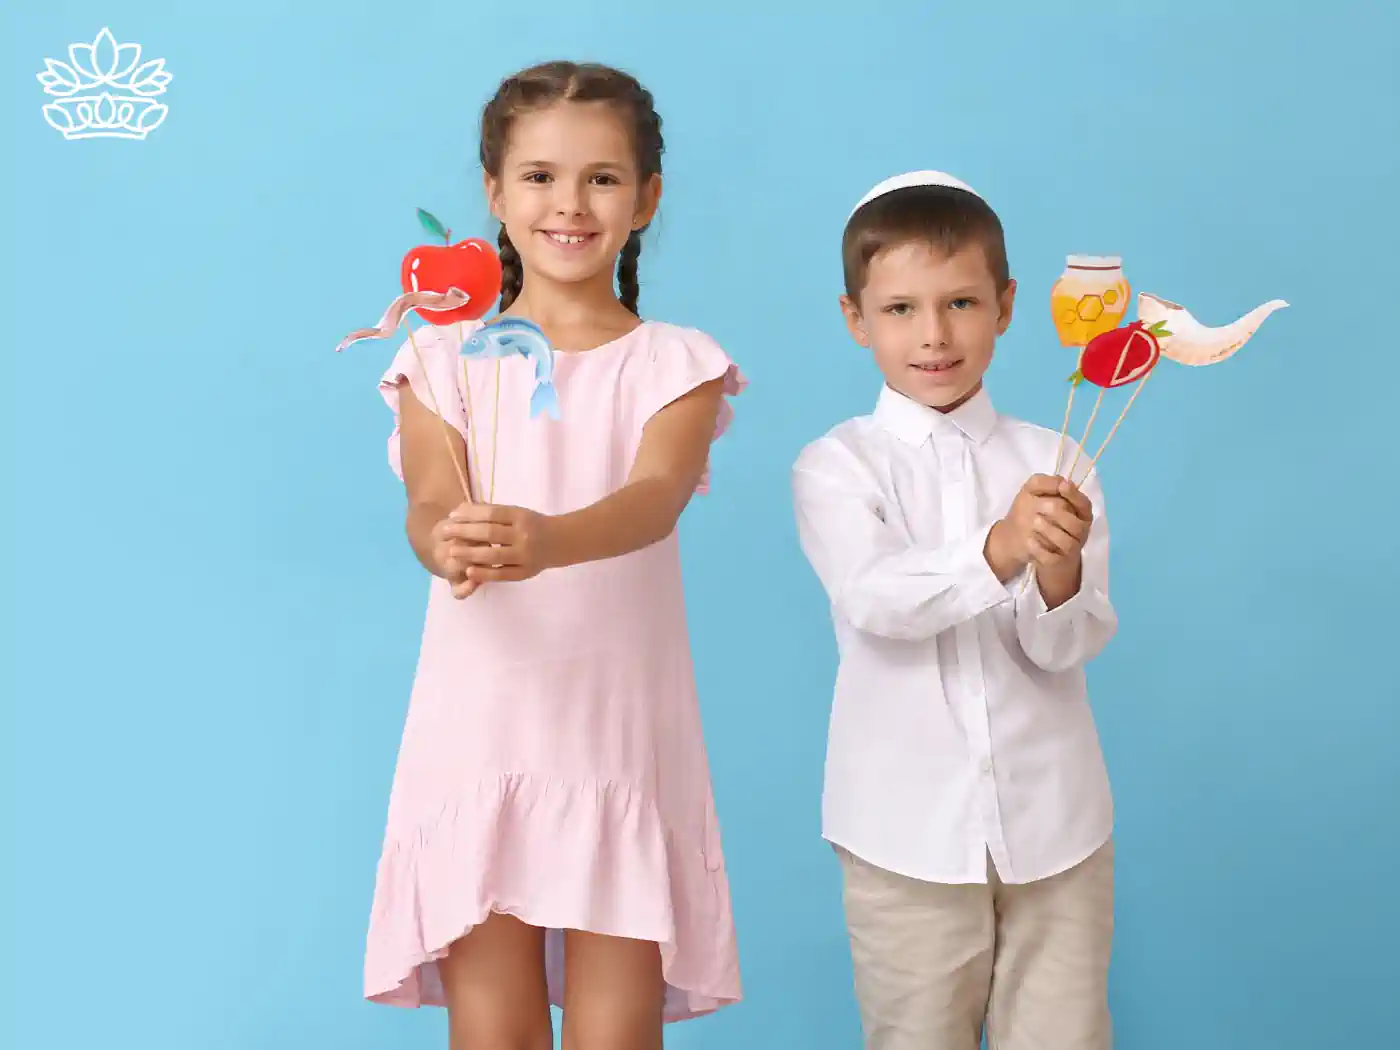 Two children holding Rosh Hashanah themed props against a blue background - Fabulous Flowers and Gifts, Rosh Hashanah Flowers Collection.